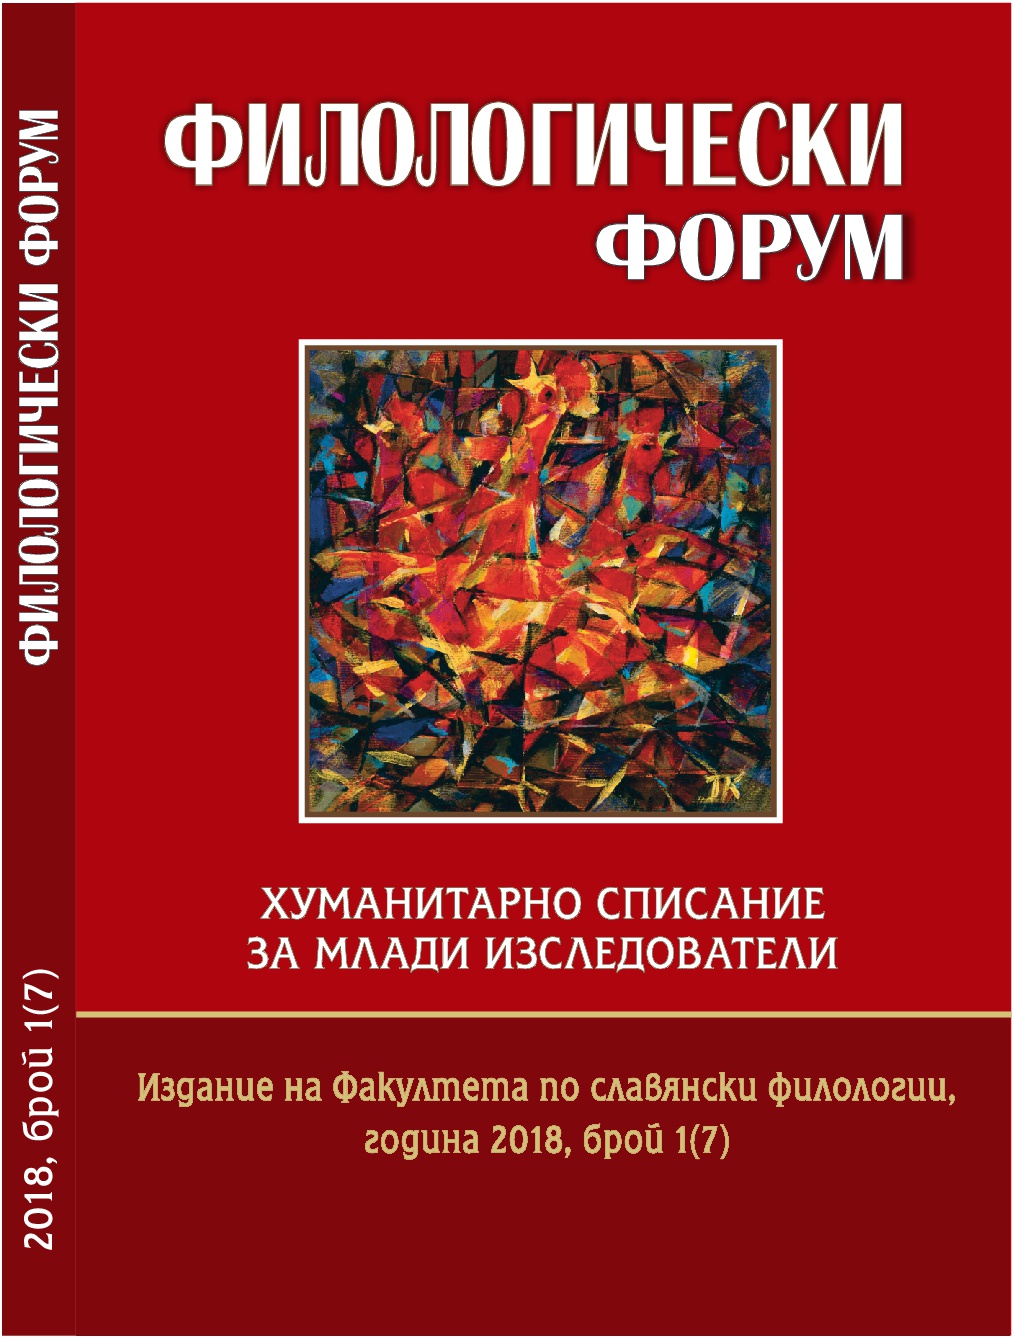 The Use of Presemanticised Addresses in Certain Works of Fiction in Czech and Bulgarian Cover Image